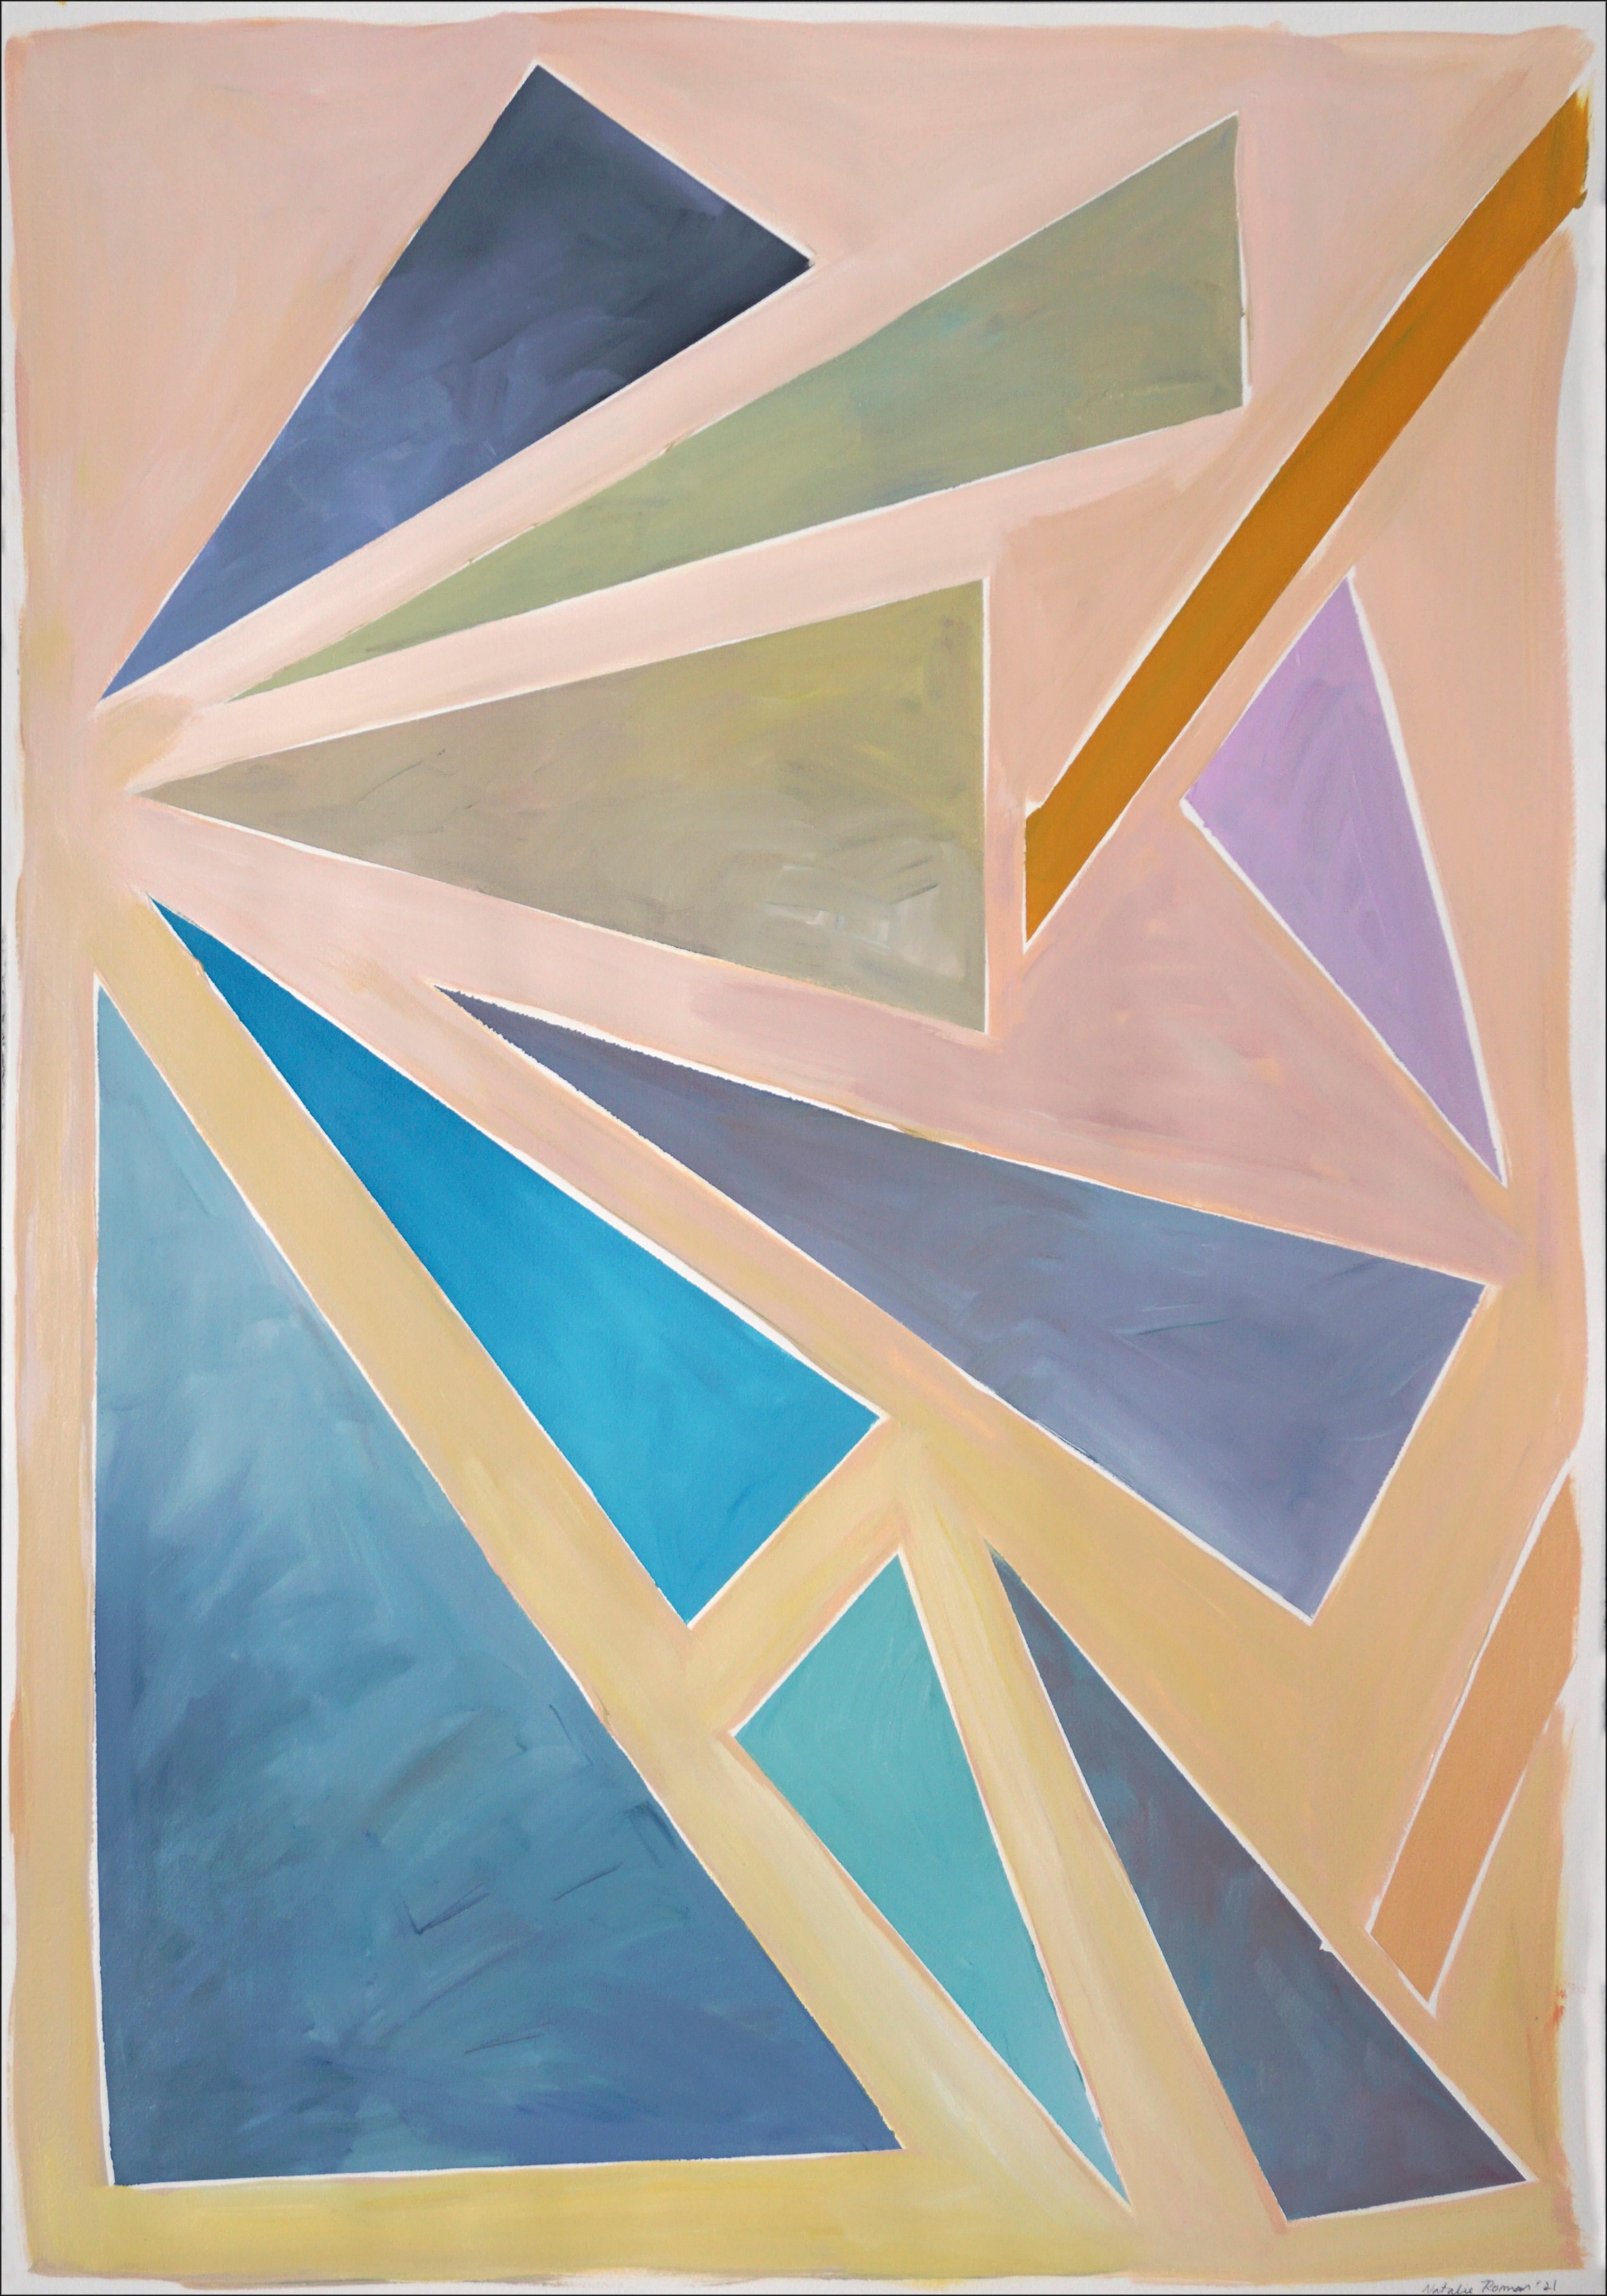 Natalia Roman Abstract Painting - Constructivist Sunset Triangles, Pastel Tones Background, Geometry Floating